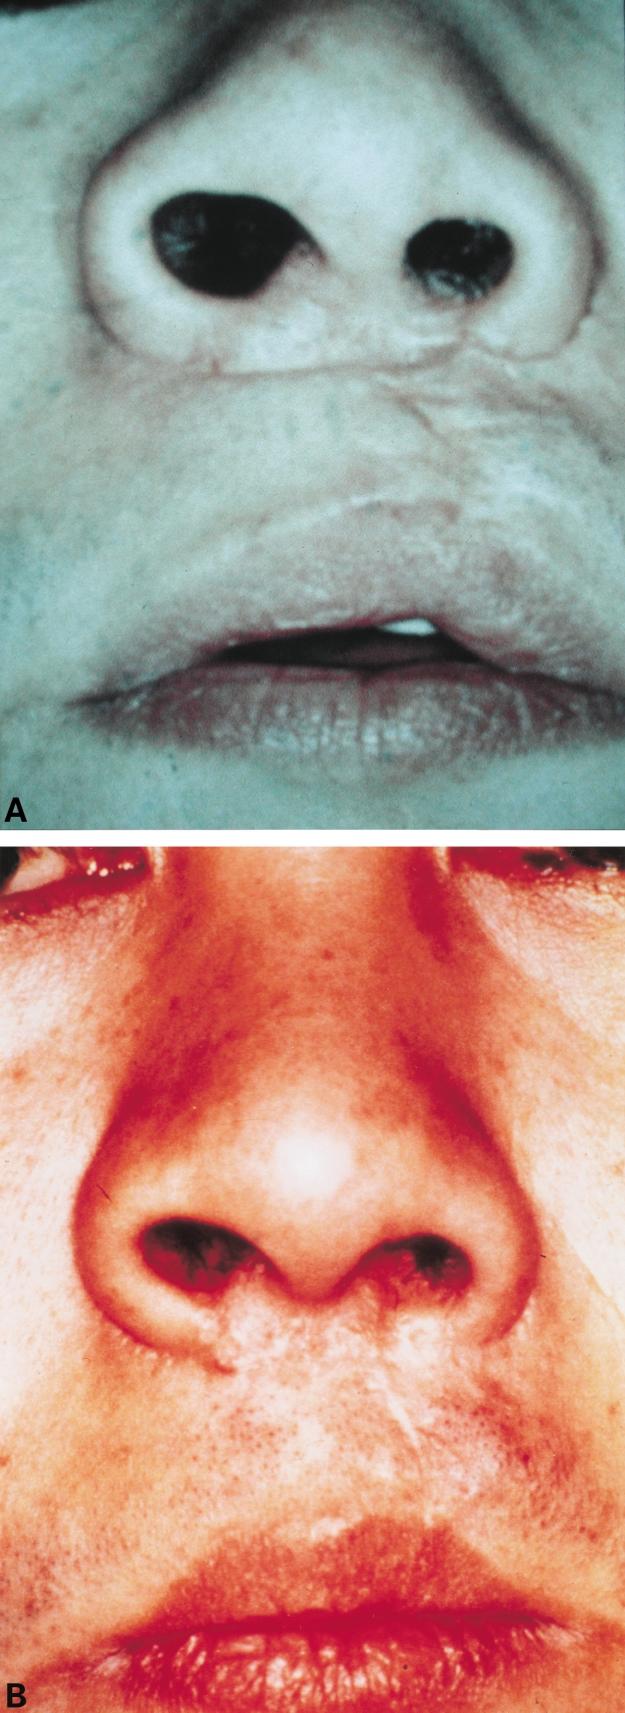 Surgical creation of a Cupid s bow using W-plasty in patients after cleft lip surgery 377 Fig.